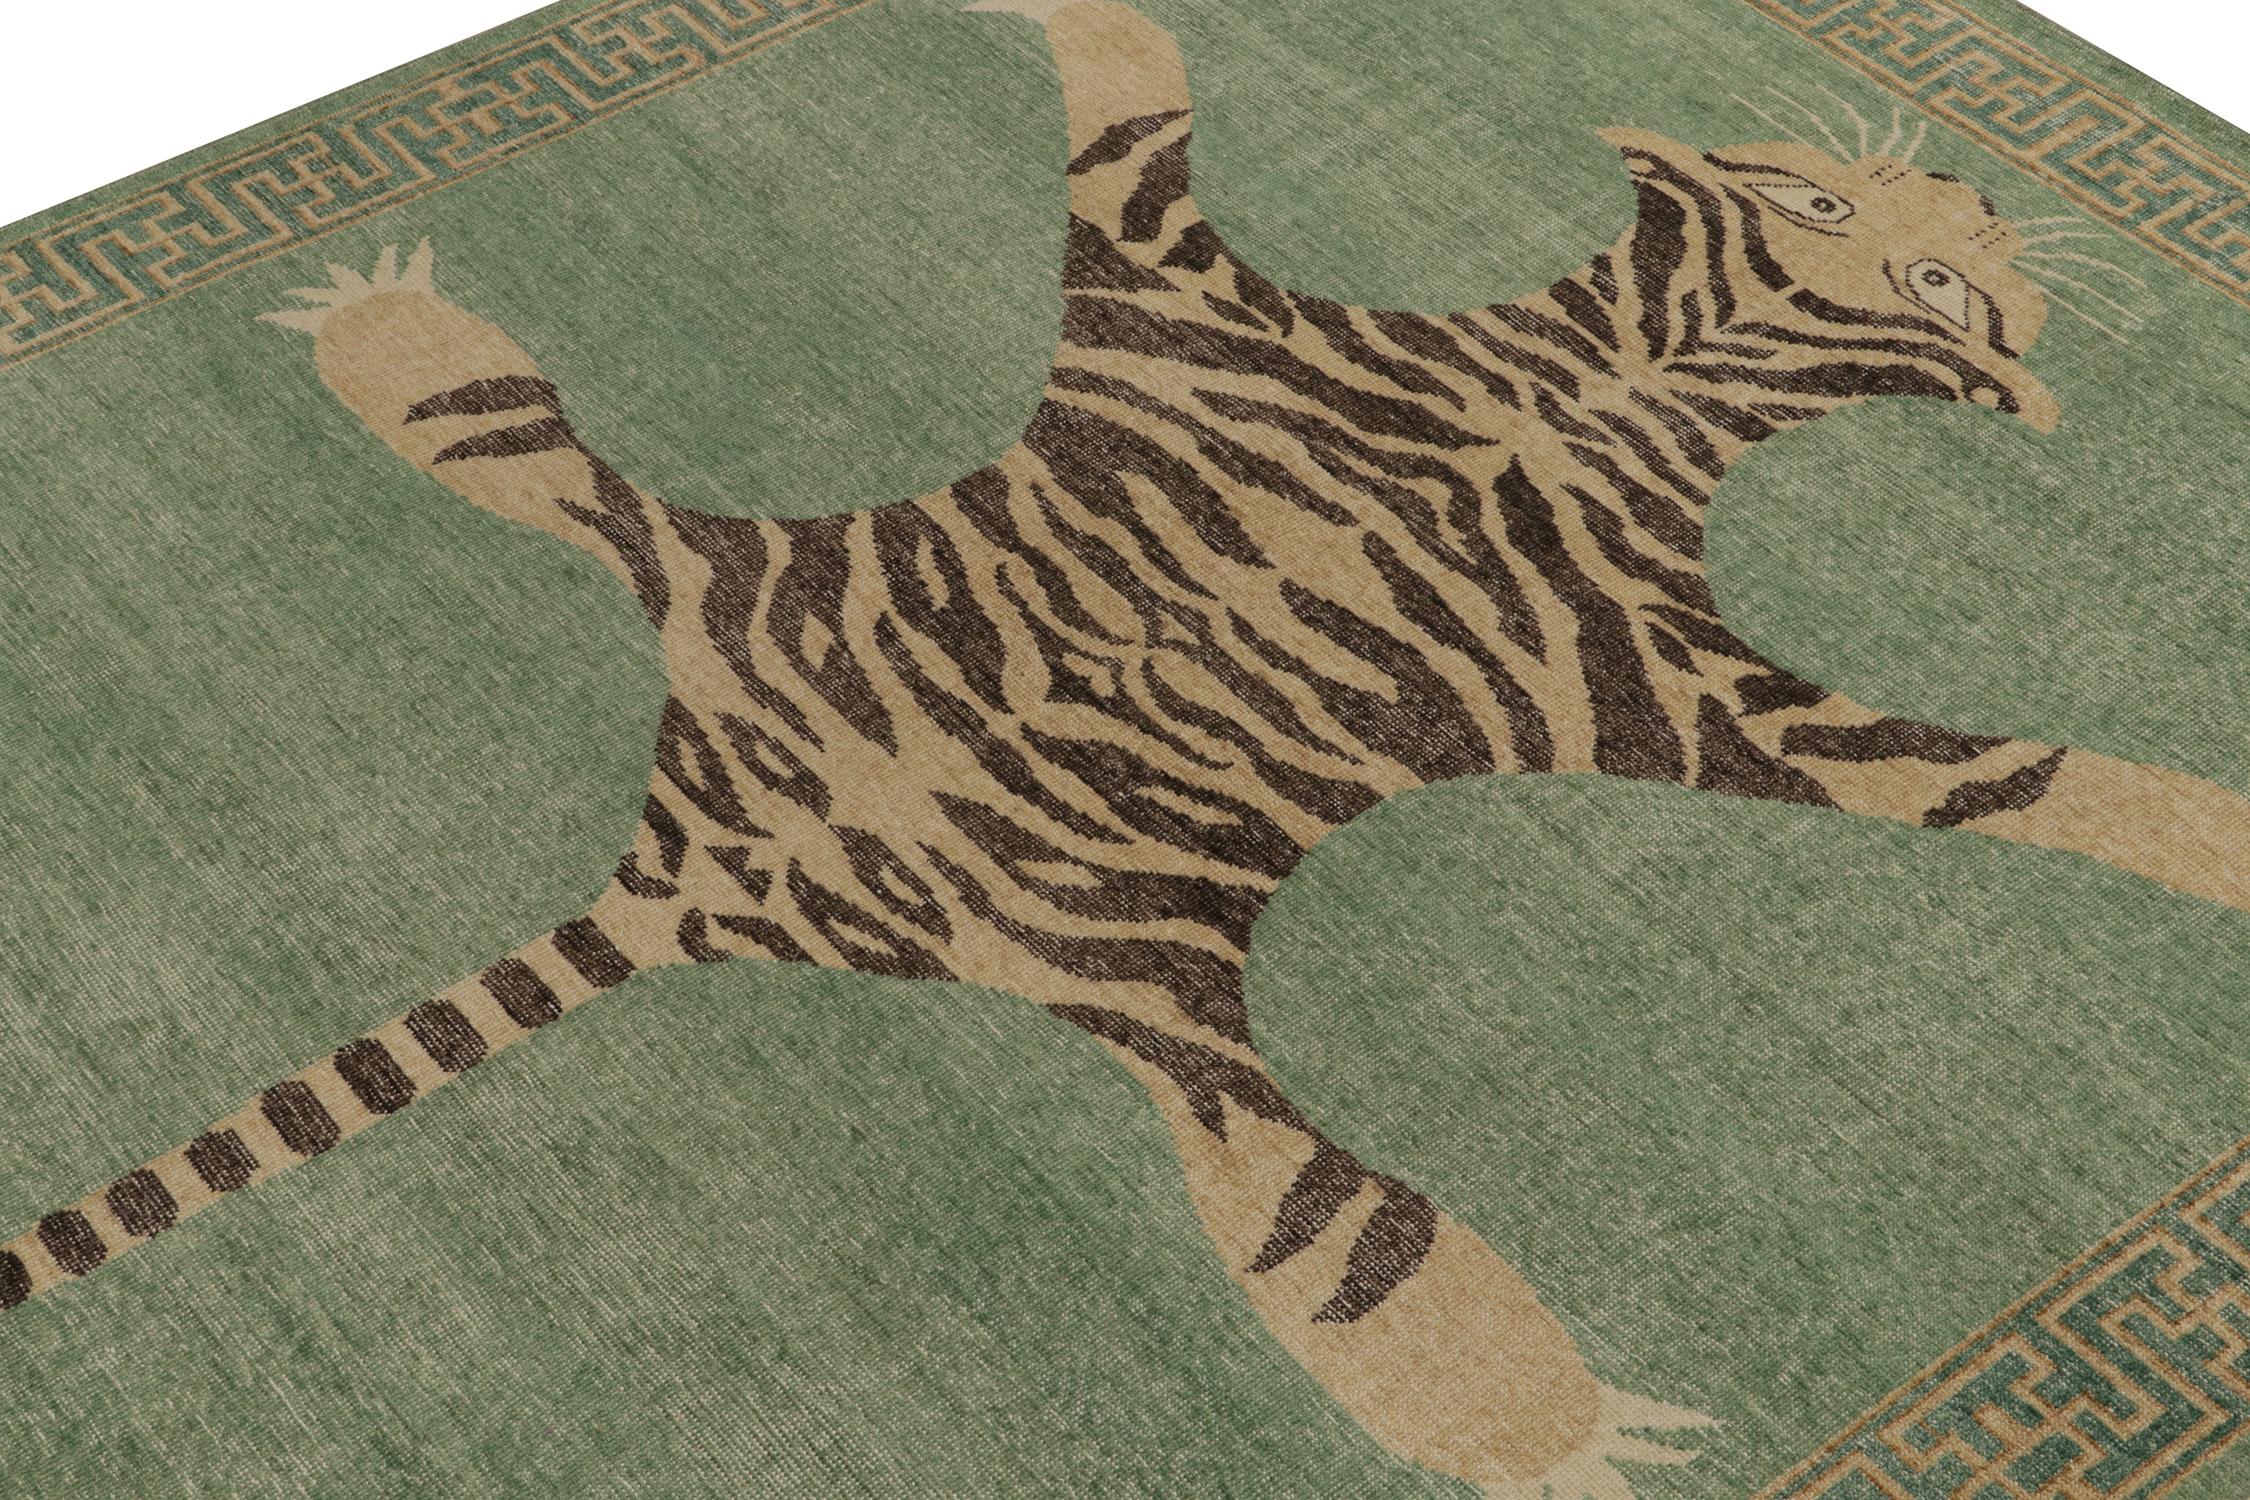 Hand-Knotted Rug & Kilim’s Distressed Tiger Skin Style Rug in Green, Beige & Black Pictorial For Sale